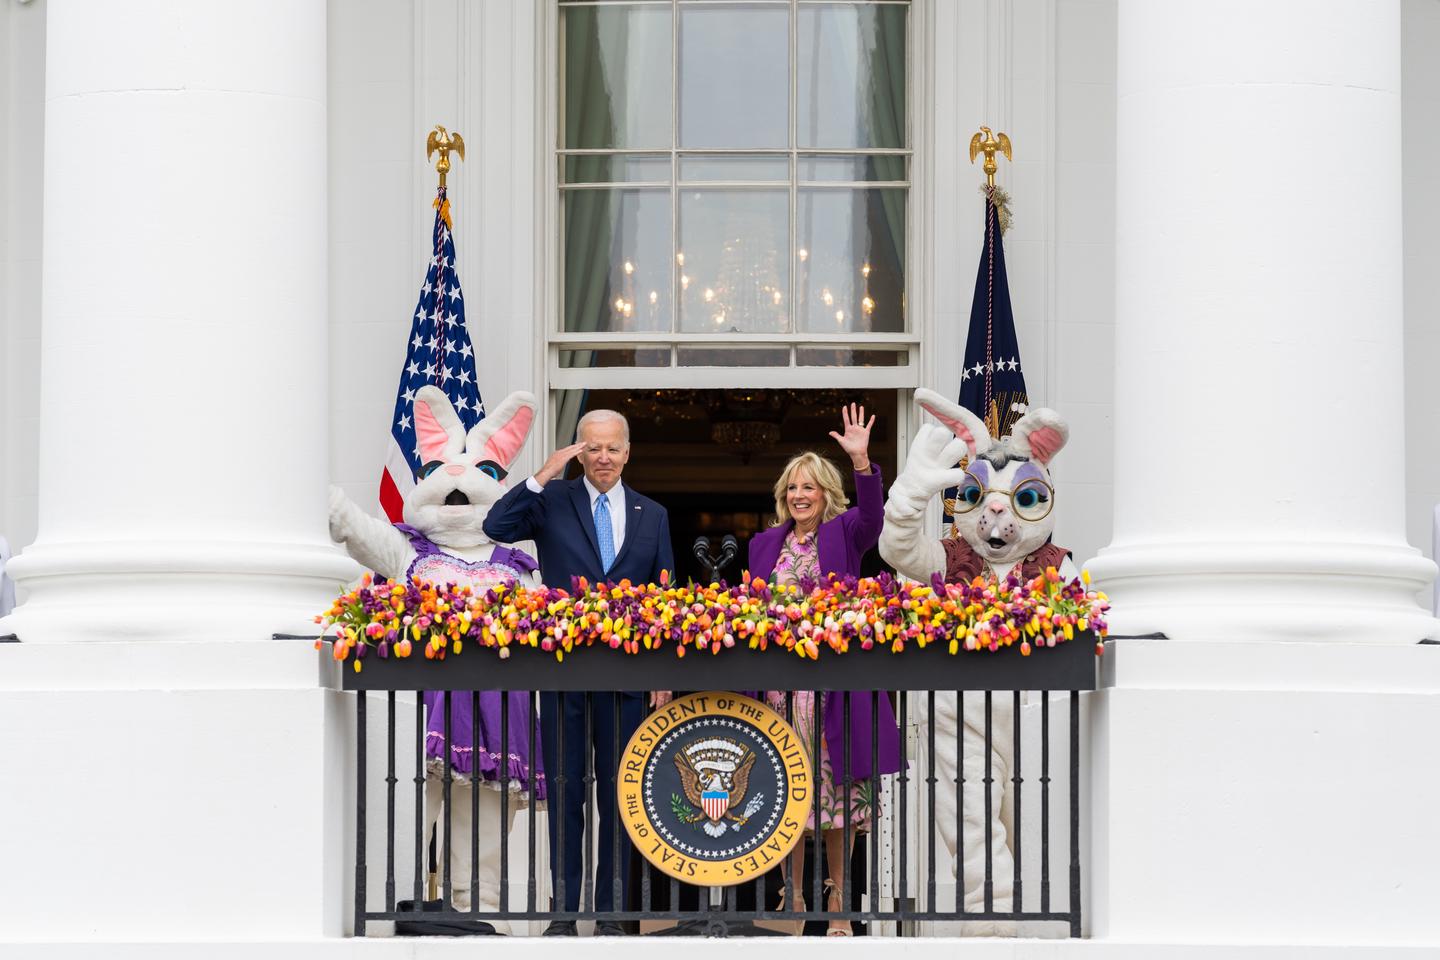 The President and First Lady with Easter Bunnies waving to visitors at the White House Easter Egg Roll